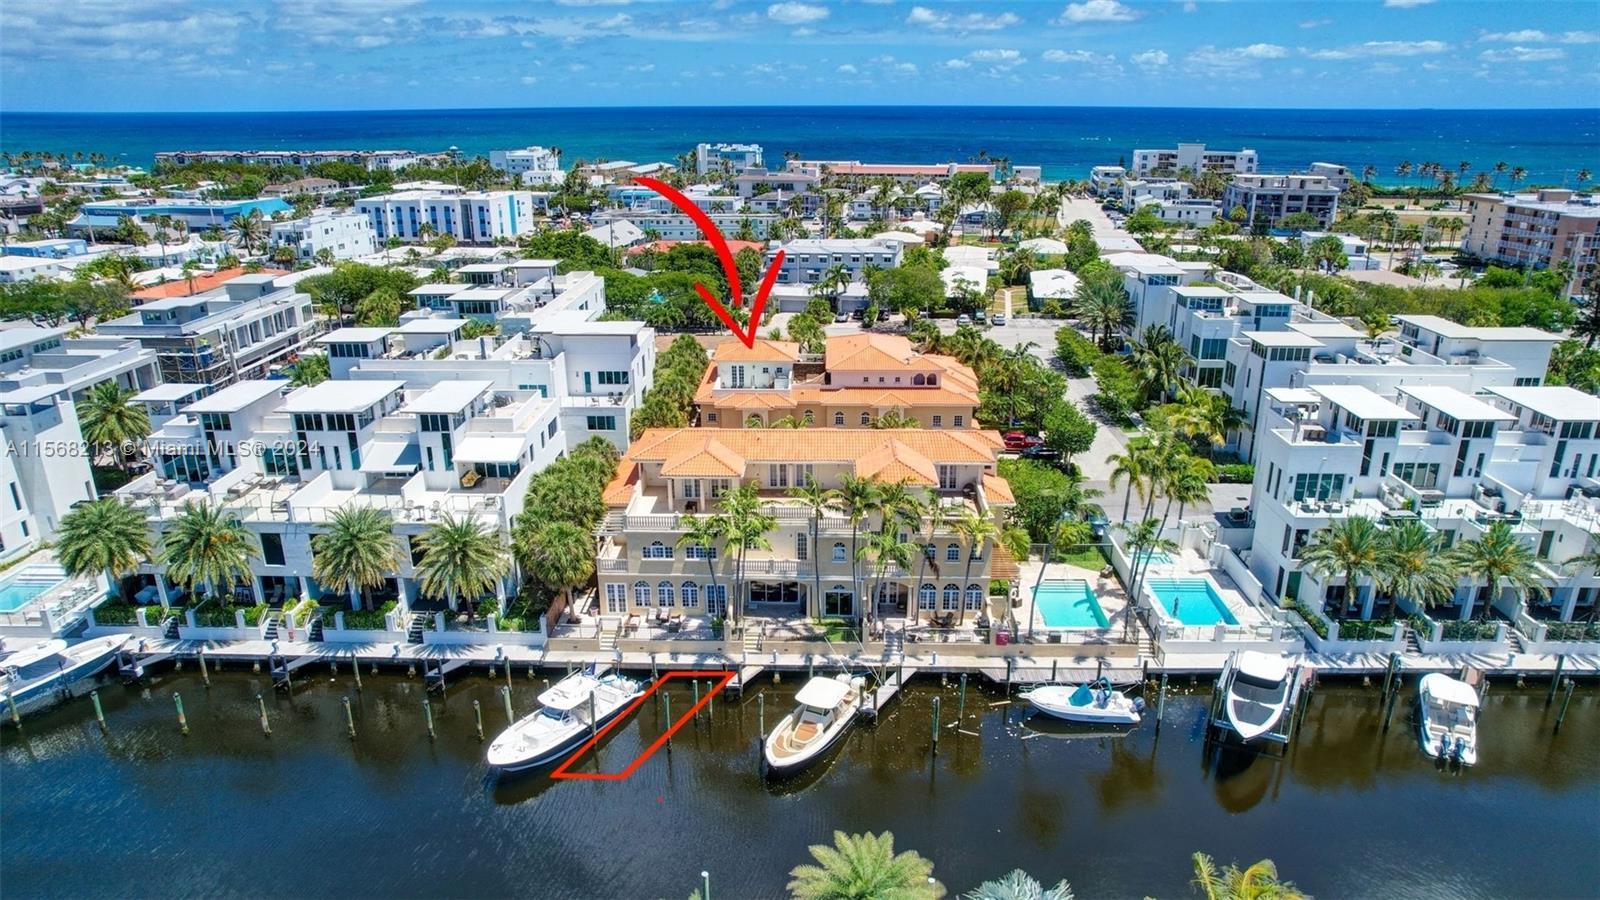 Welcome to your Modern 4 Bed, 4.5 Bath Townhouse w/ Ocean-access, Deeded Dockage for your 37’ Boat! 